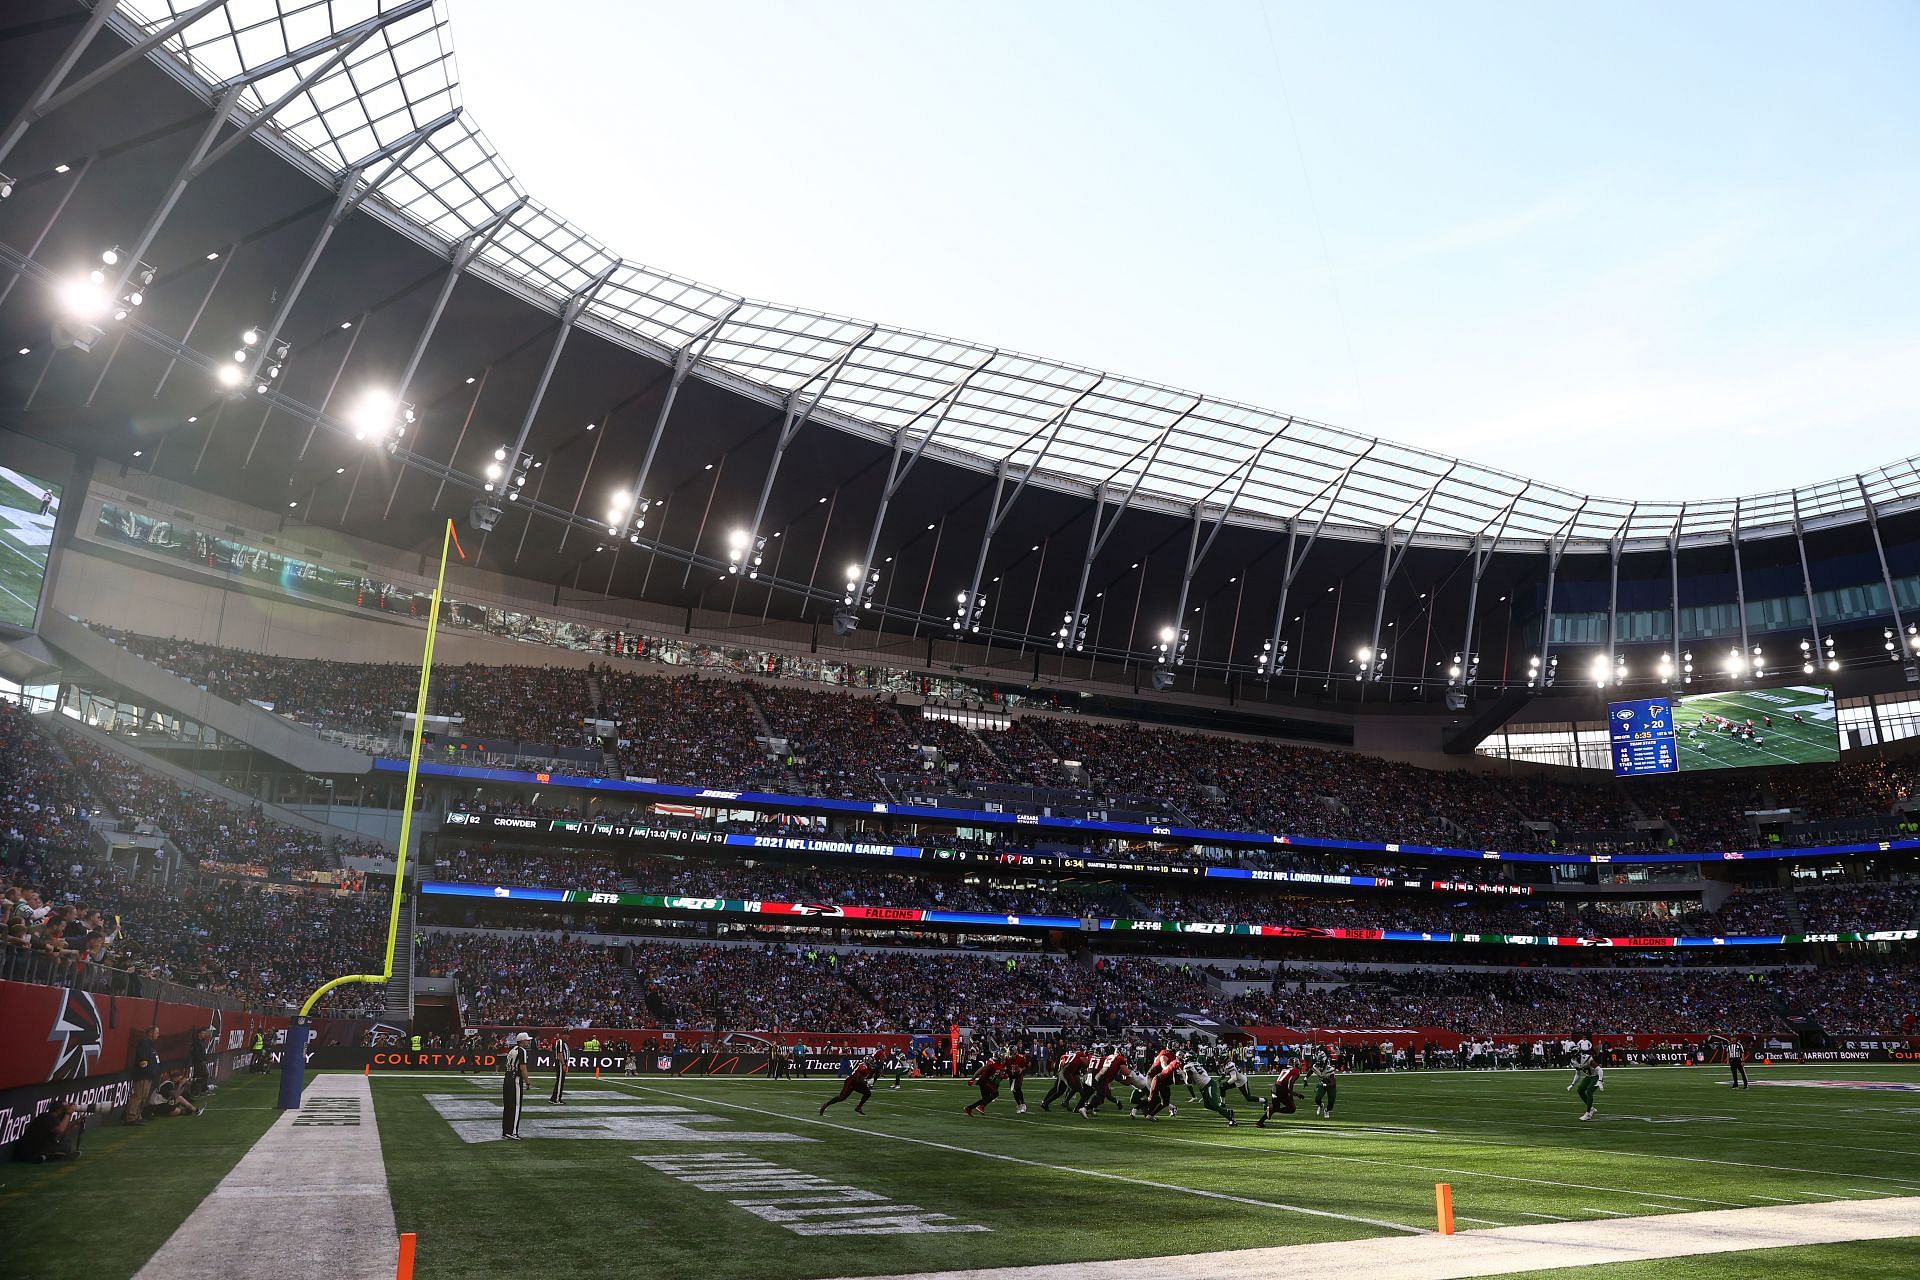 Incredible' – NFL players left in awe over Tottenham Hotspur Stadium